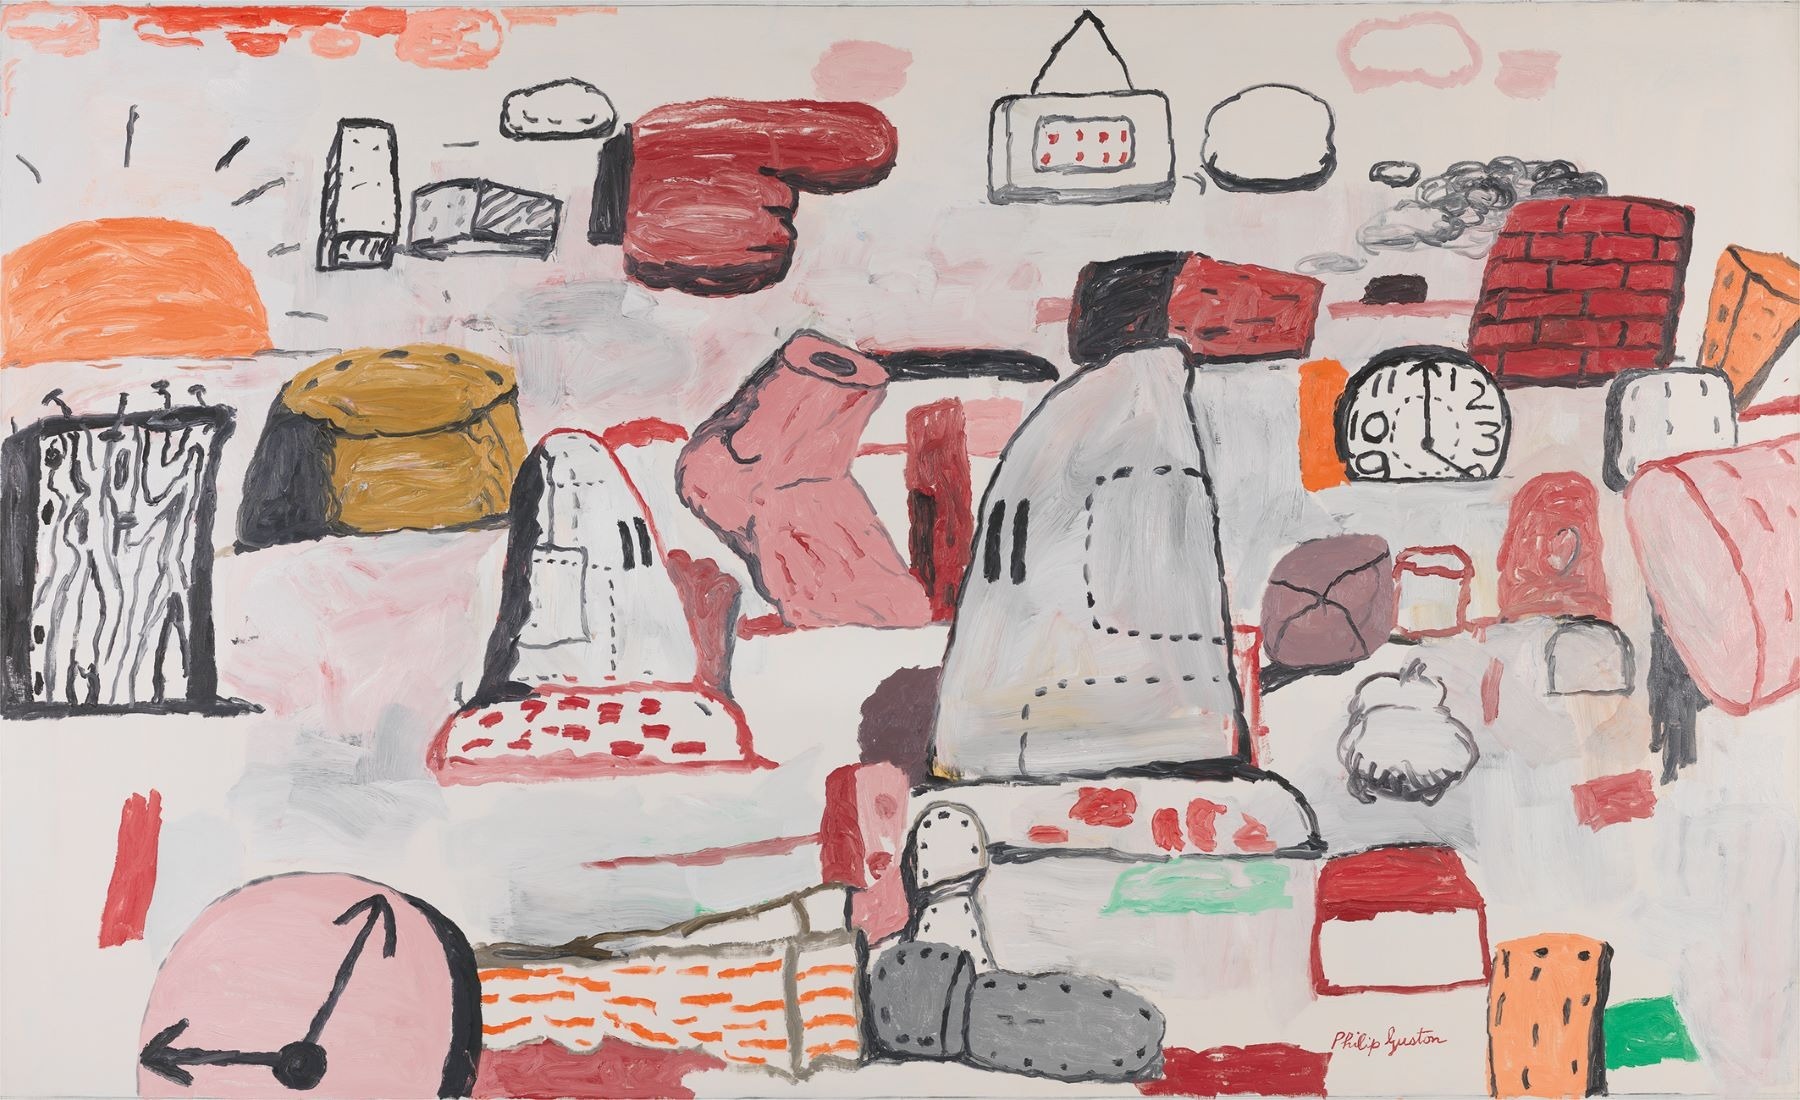 'Flatlands' (1970) by Philip Guston shows a seemingly random collection of objects scattered across the canvas, including a brick wall, two clocks, the sun, a pair of shoes and - in the centre - two white hoods